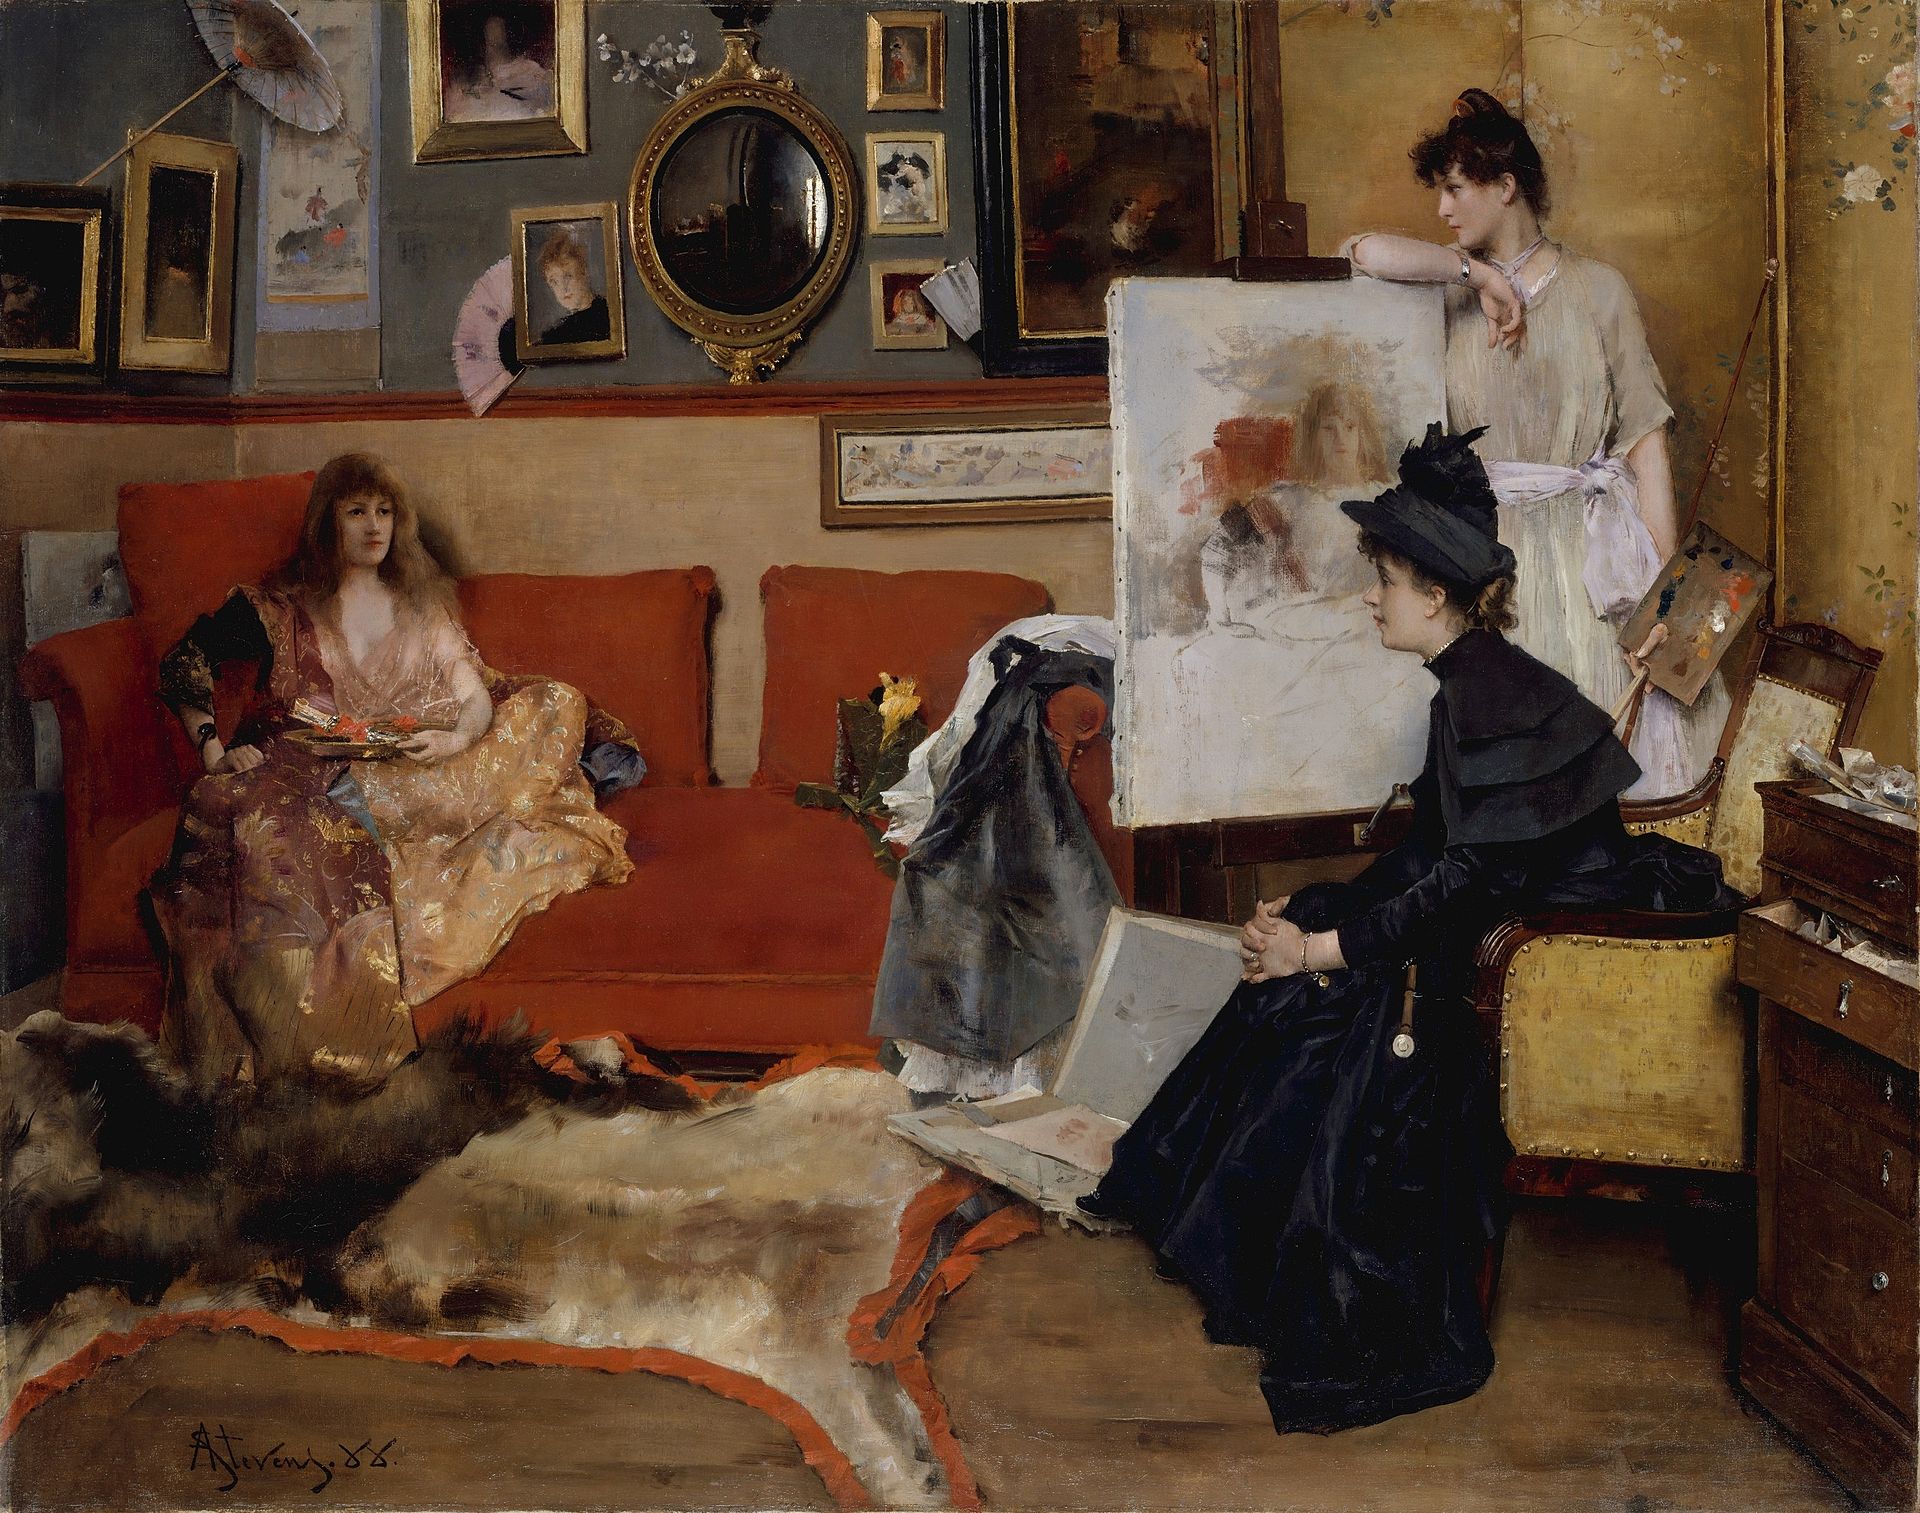 In the Studio, 1888, by Alfred Stevens